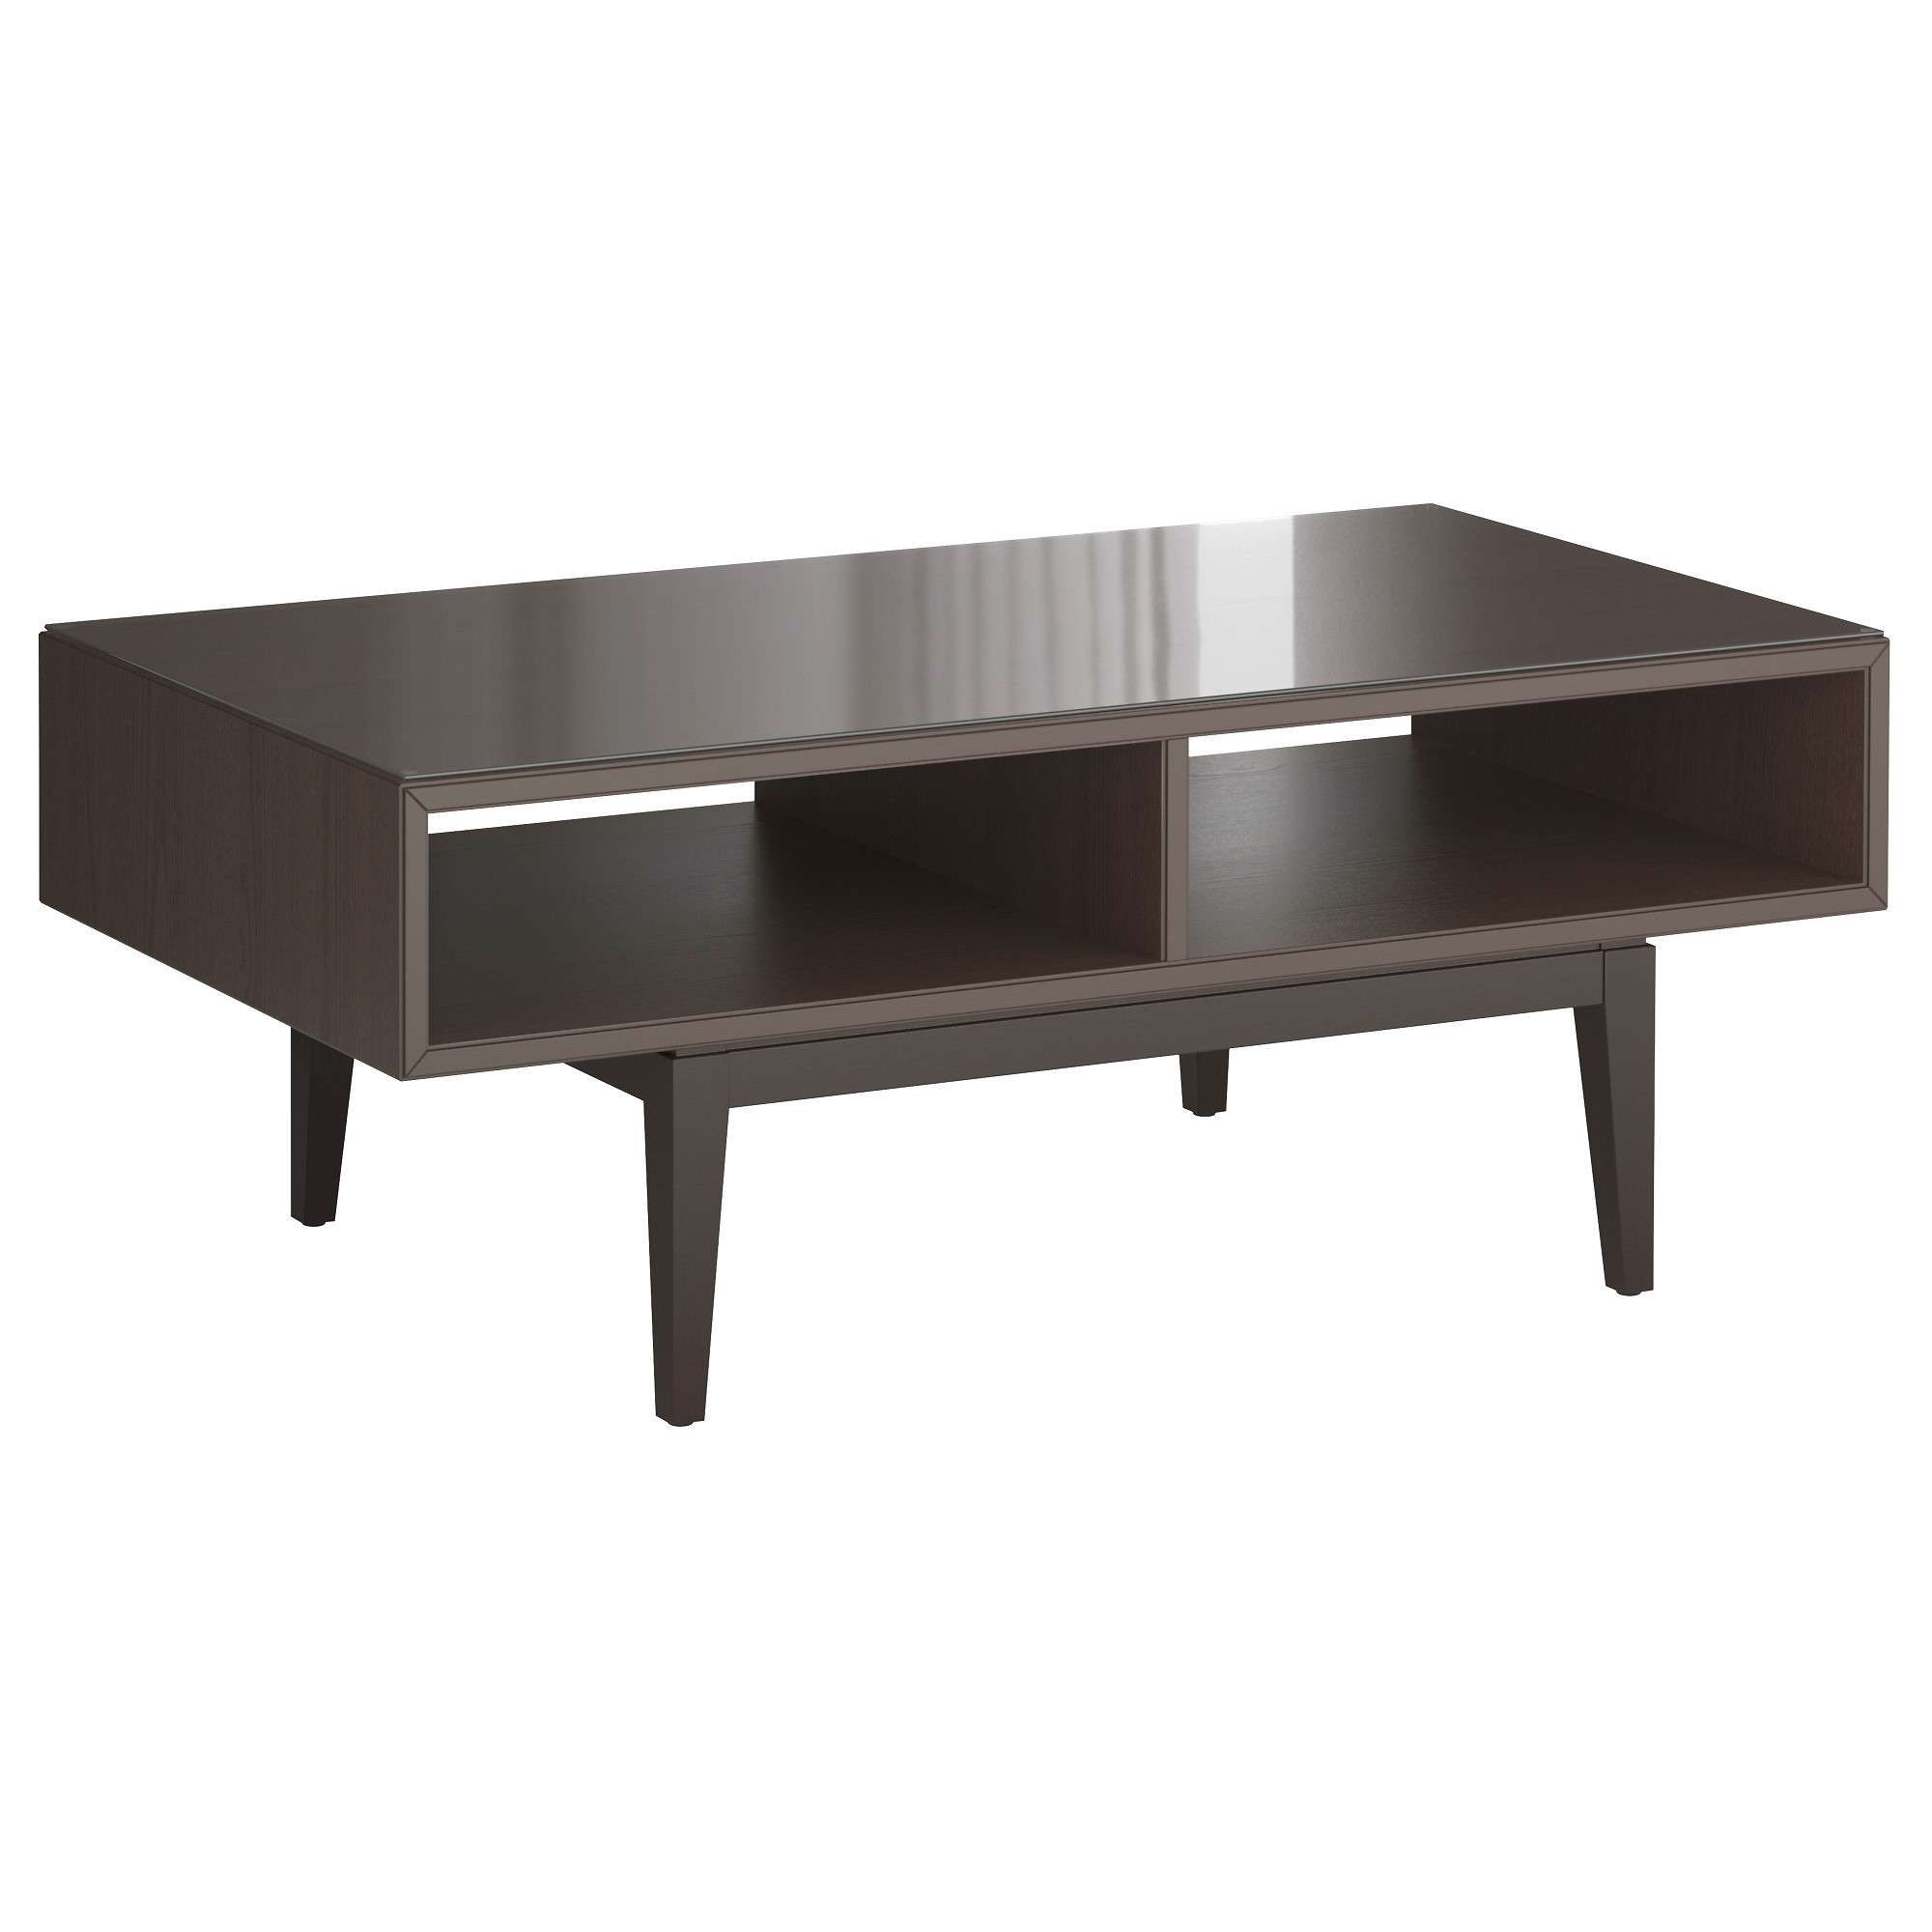 Newest Round High Gloss Coffee Tables Regarding Coffee Table : Magnificent Brown Coffee Table Wood And Metal (View 17 of 20)